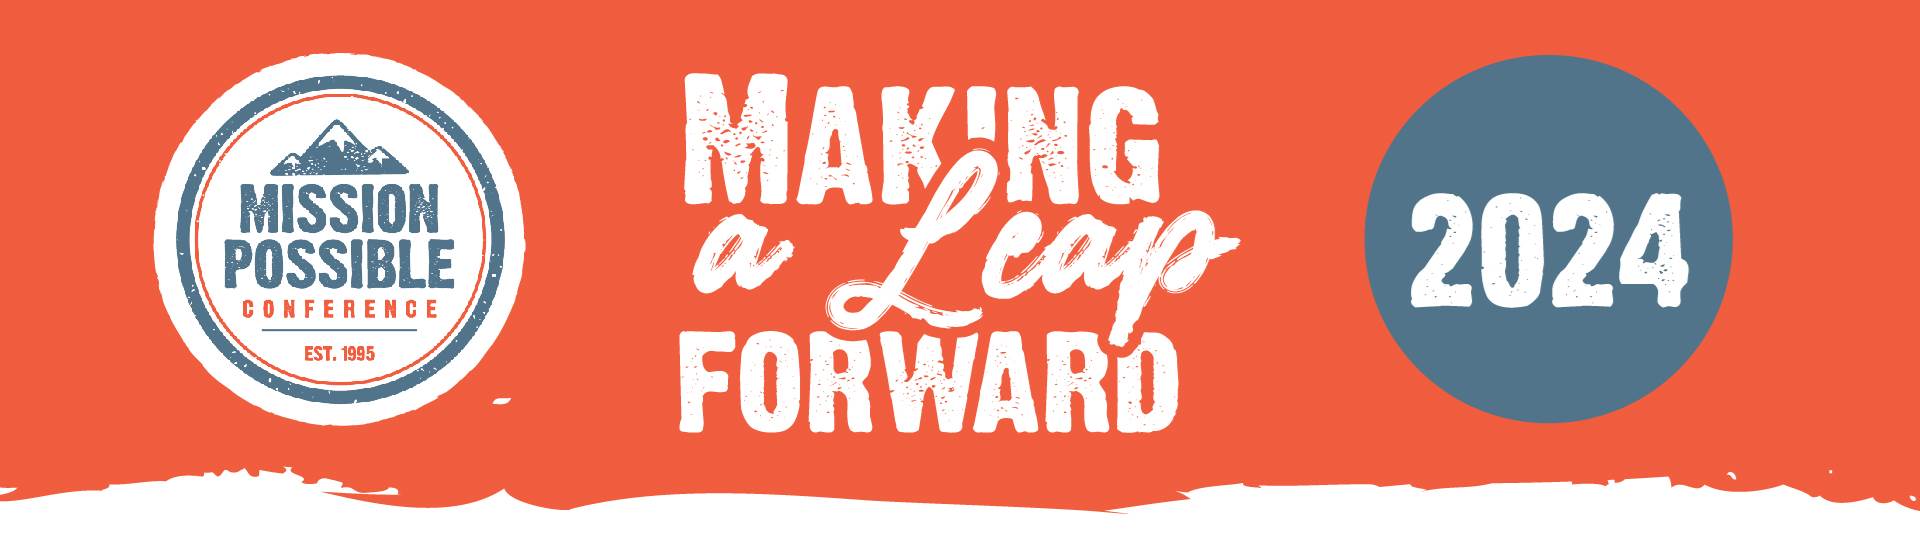 Mission Possible 2024: Making a Leap Foward